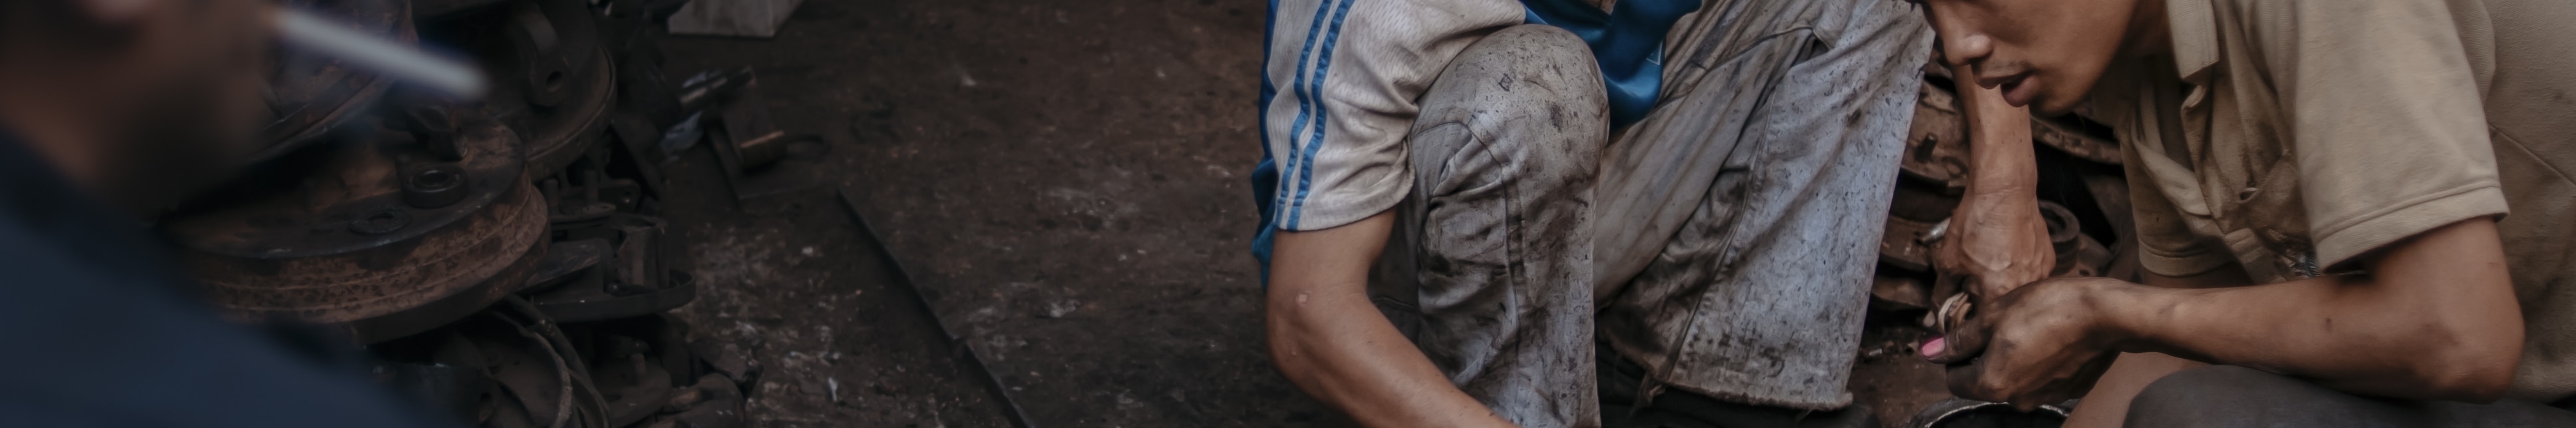 LVMH supply chains in India, Madagascar & China are tainted with forced & child labor